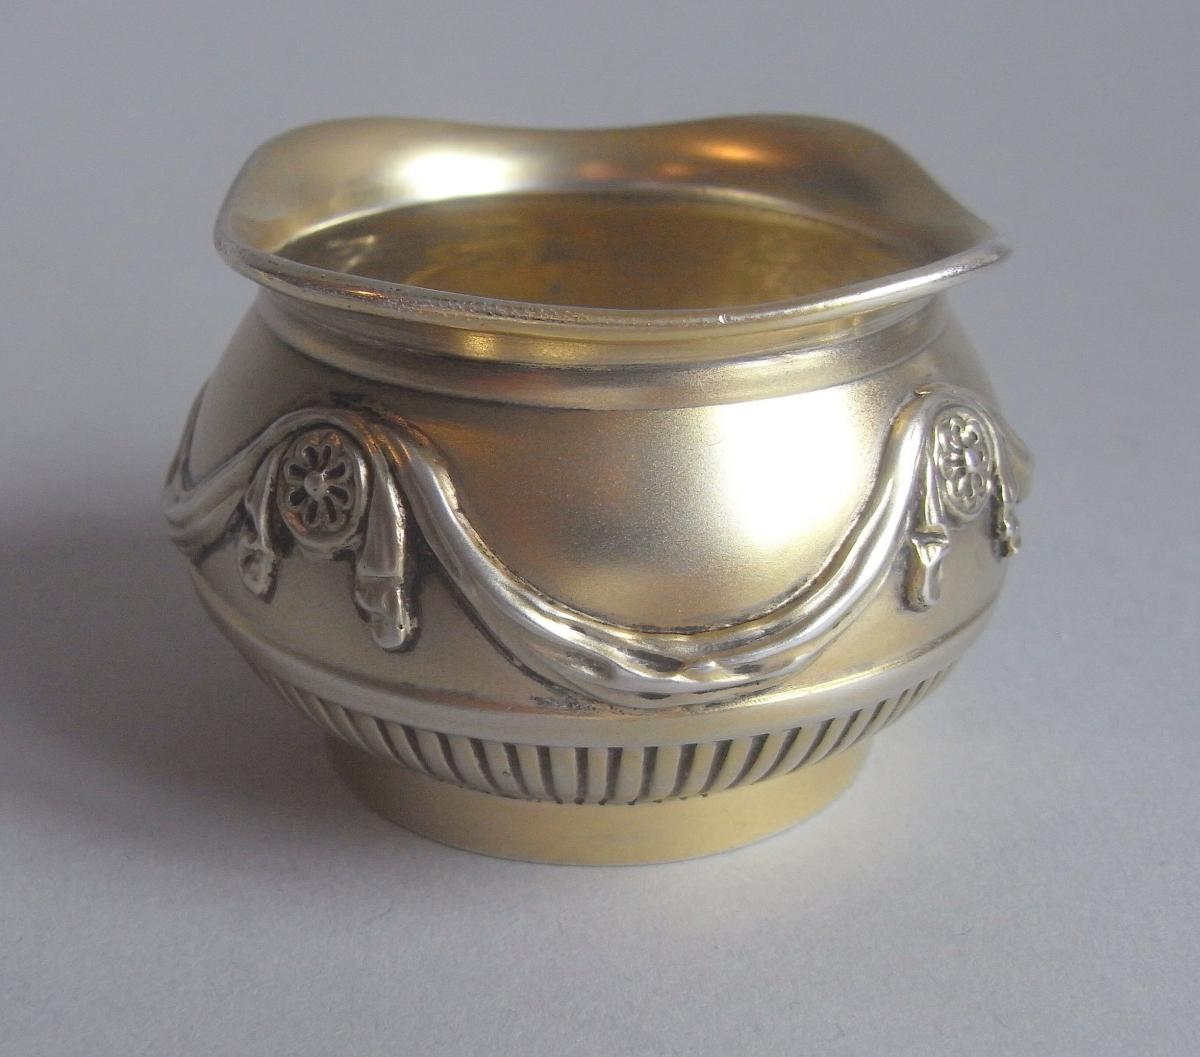 A Very Fine Pair of Silver Gilt Neo-Classical Revival Salt Cellars Made in Birmingham by Frederick Elkington in 1878